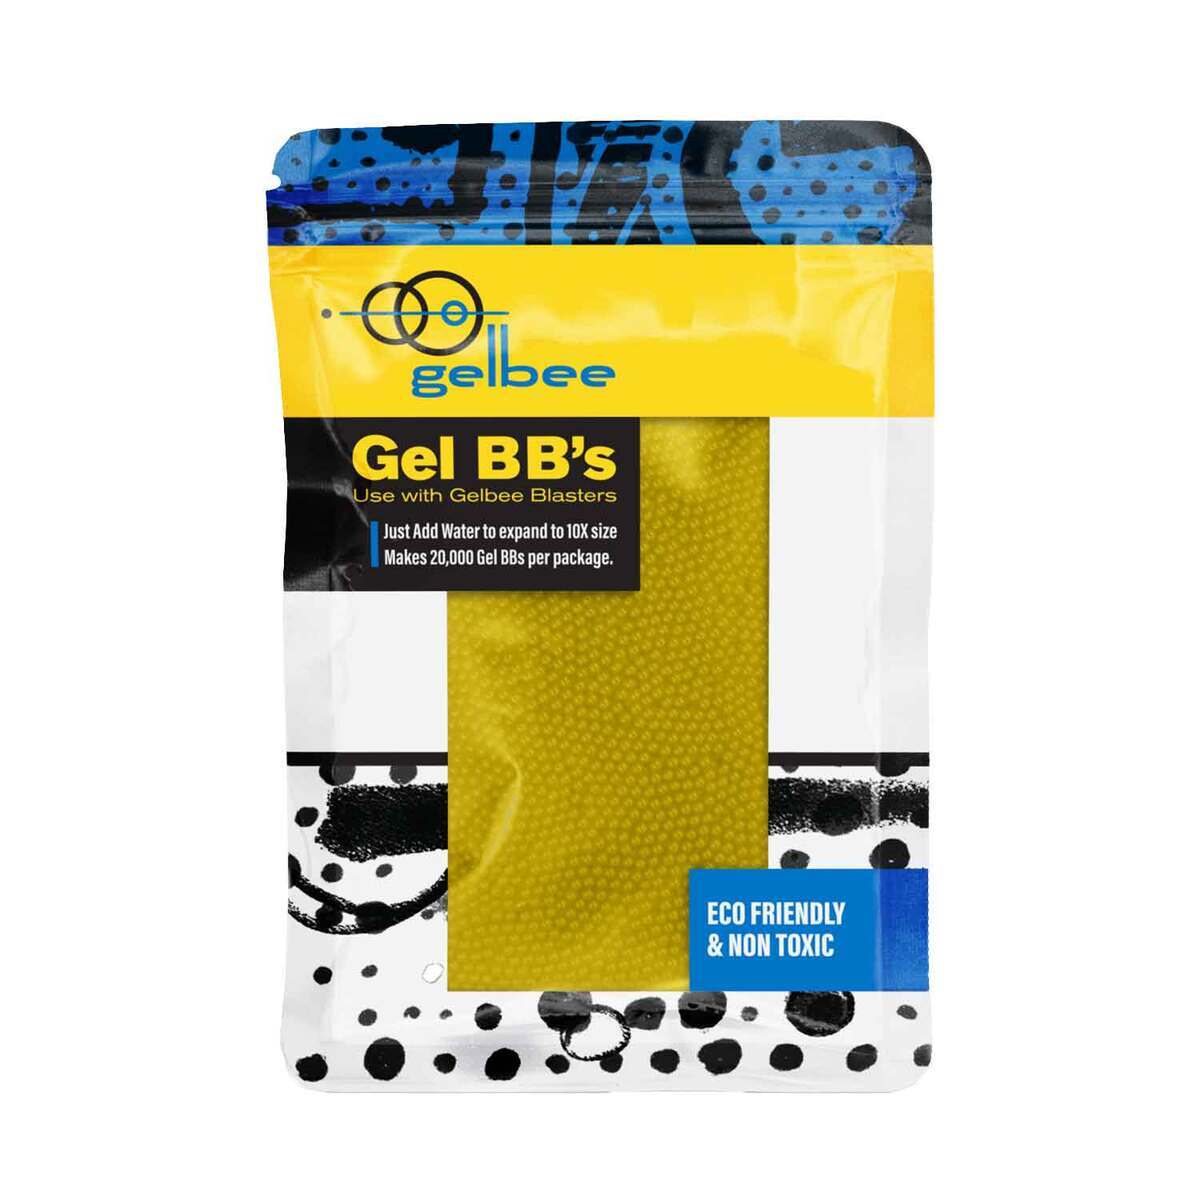 CROSMAN GELBEE, 20000 COUNT GEL BB'S - 2  AVAILABLE COLORS : BLUE / YELLOW